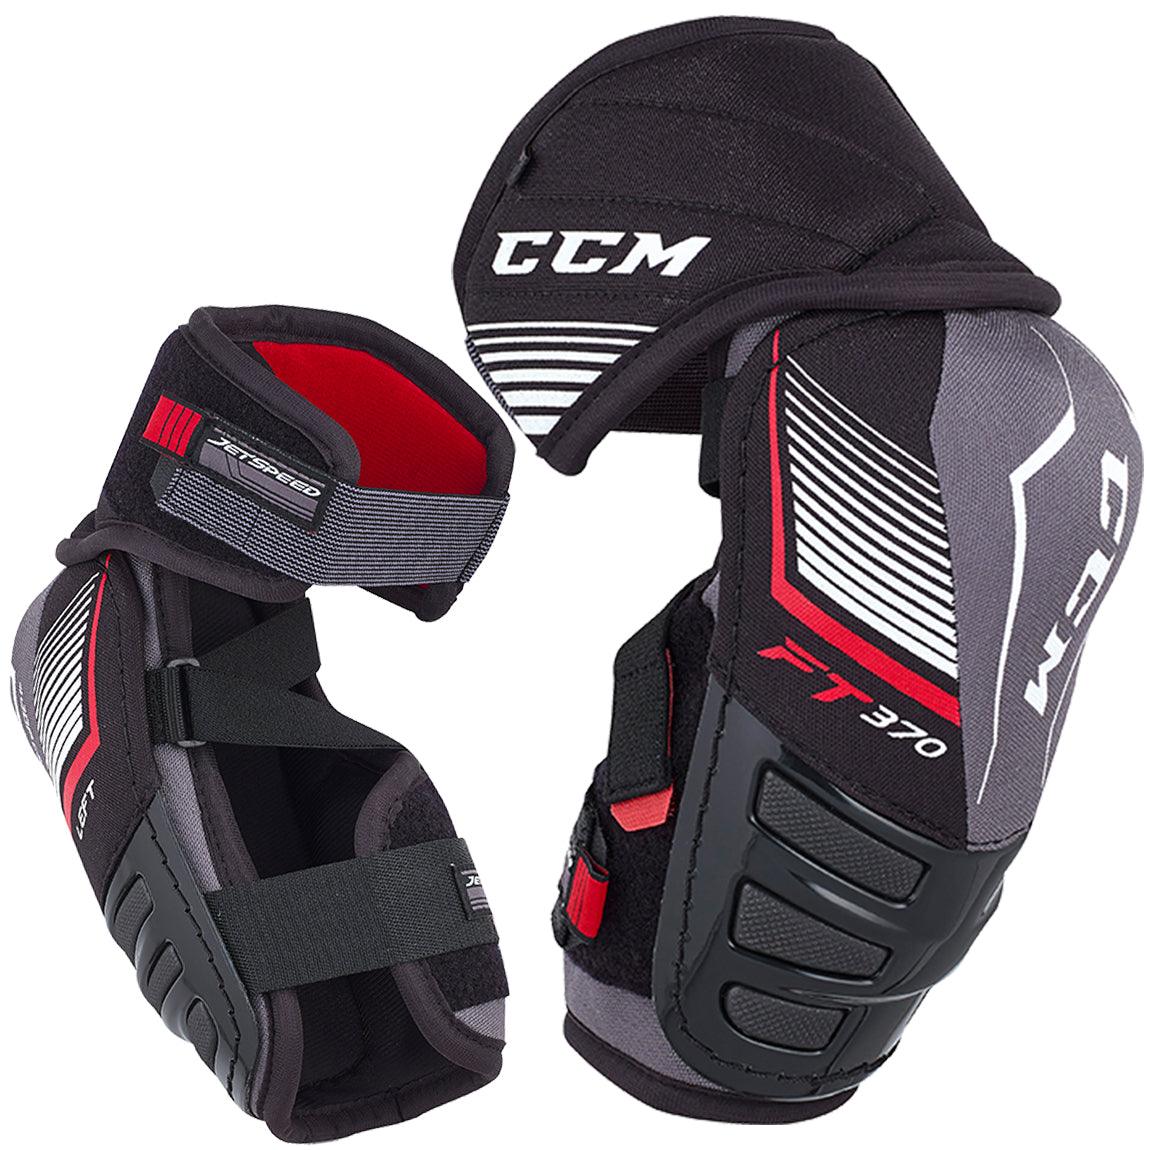 JetSpeed FT370 Elbow Pads - Senior - Sports Excellence